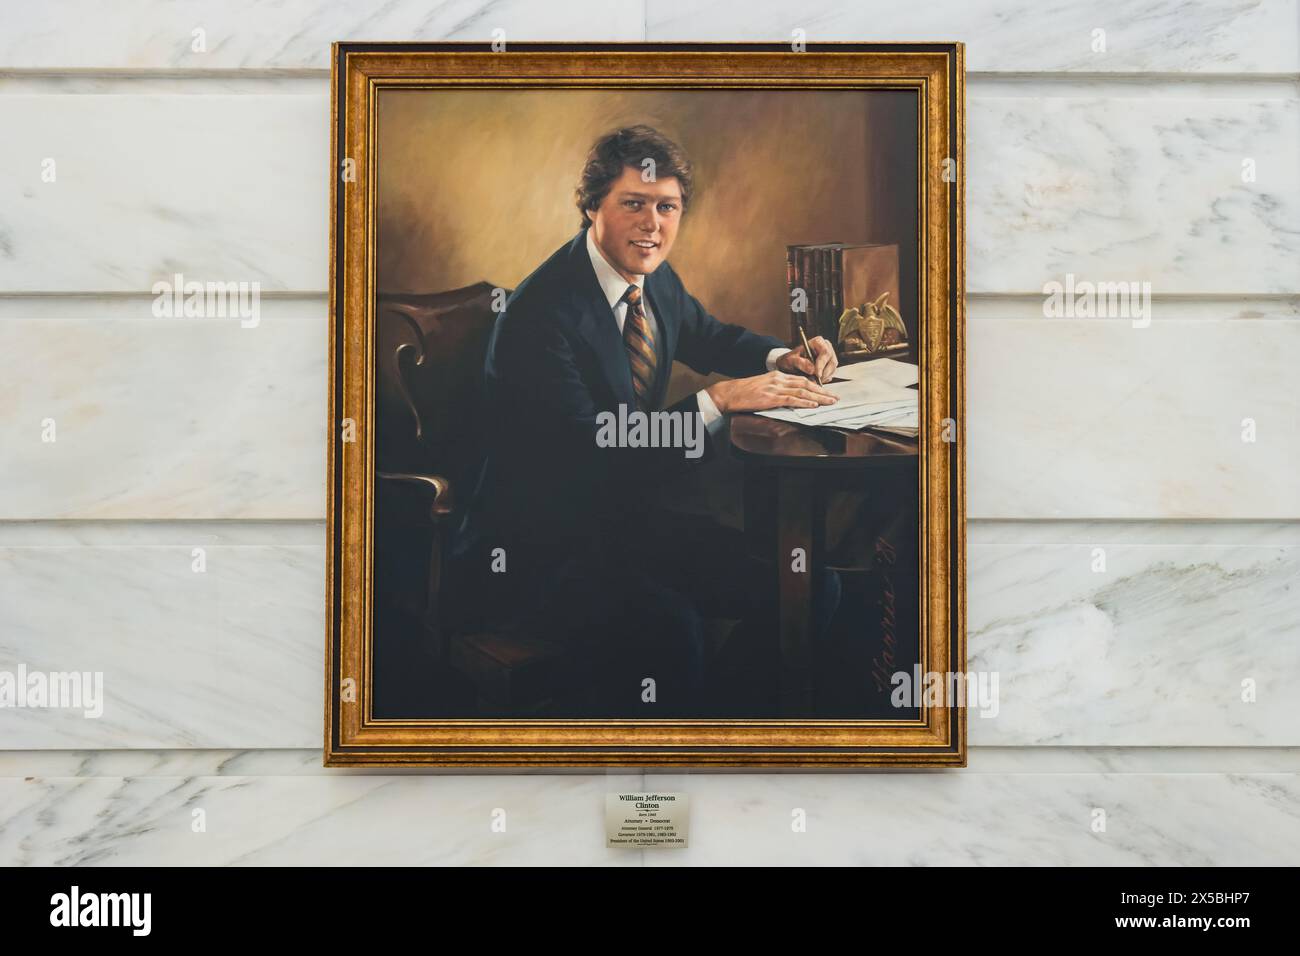 Portrait of Bill Clinton governor of Arkansas and president of the United States in The Arkansas State Capitol in Little Rock, Arkansas, USA. Stock Photo